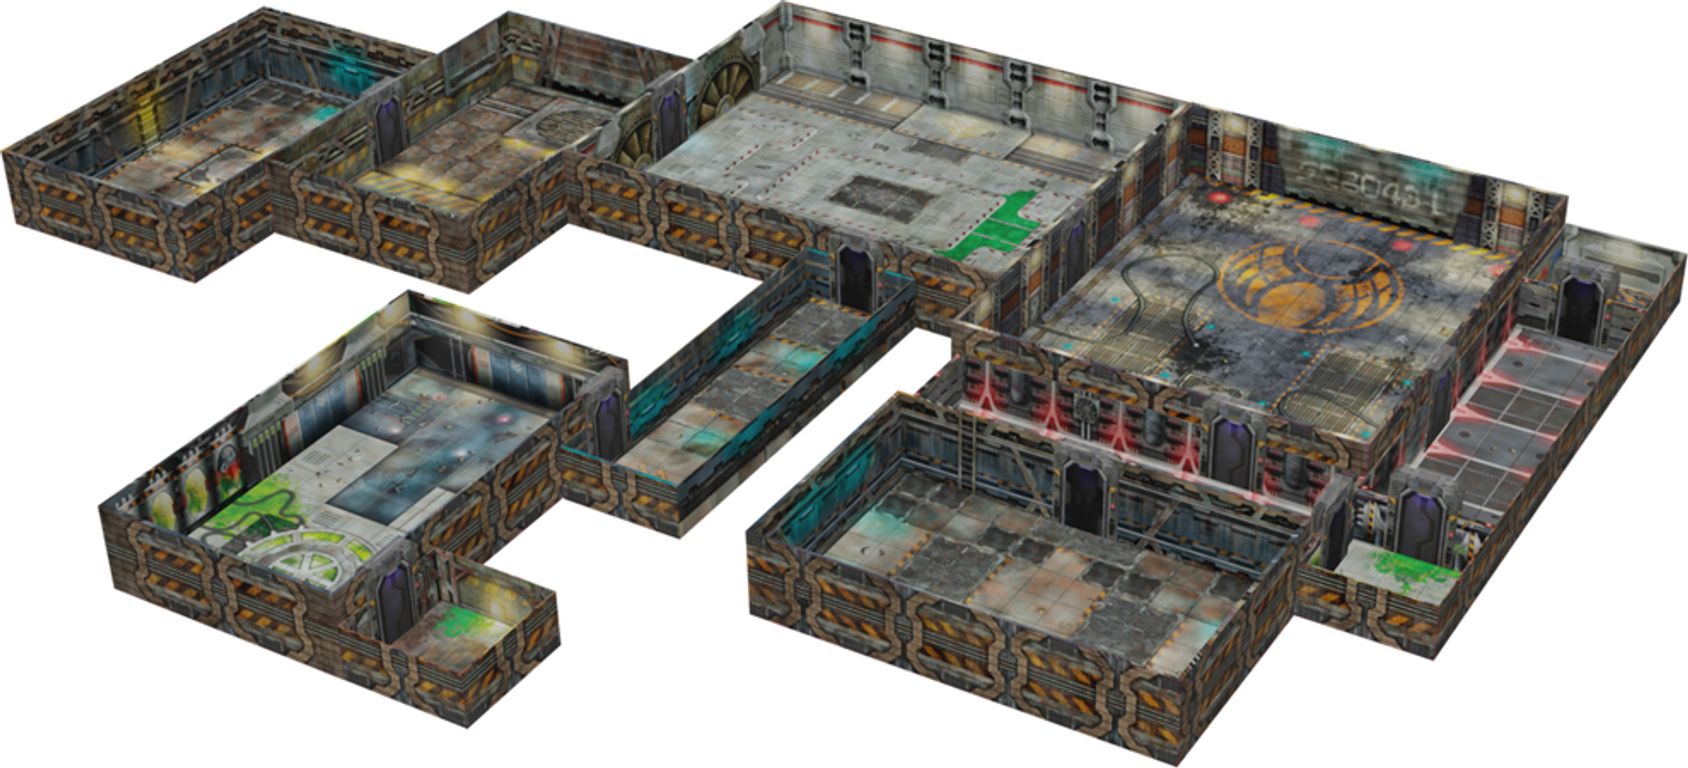 Tenfold Dungeon: Daedalus Station partes